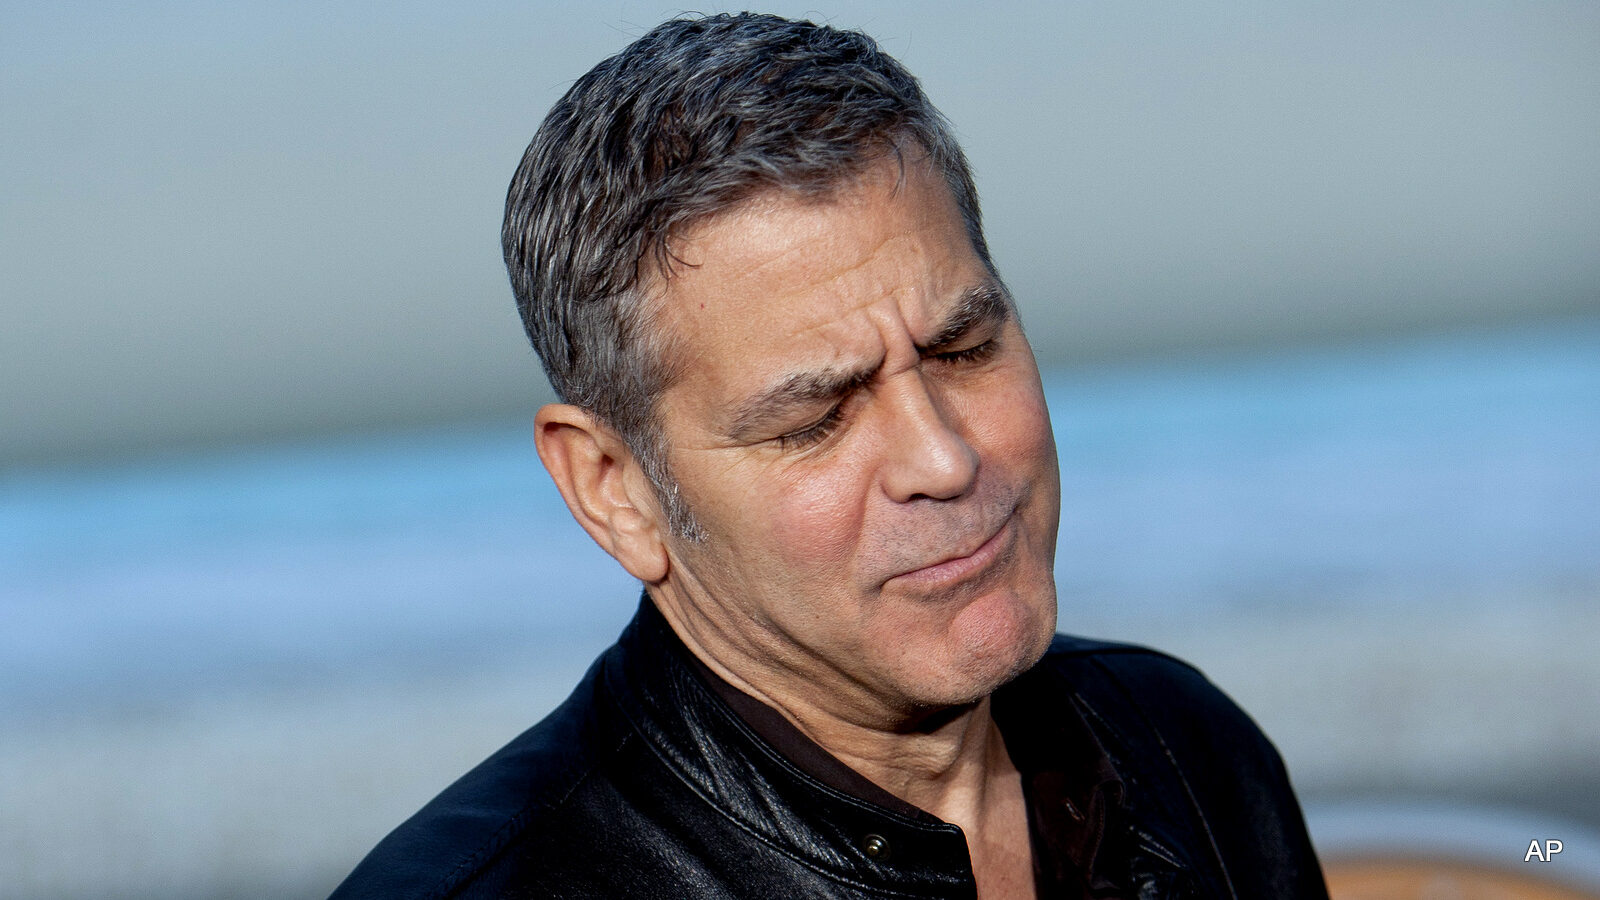 US actor George Clooney speaks with photographers and leaves the photocall during the premiere of the film 'Tomorrow Land' at Ciudad de las Artes y las Ciencias in Valencia, Spain on Tuesday, May 19, 2015.